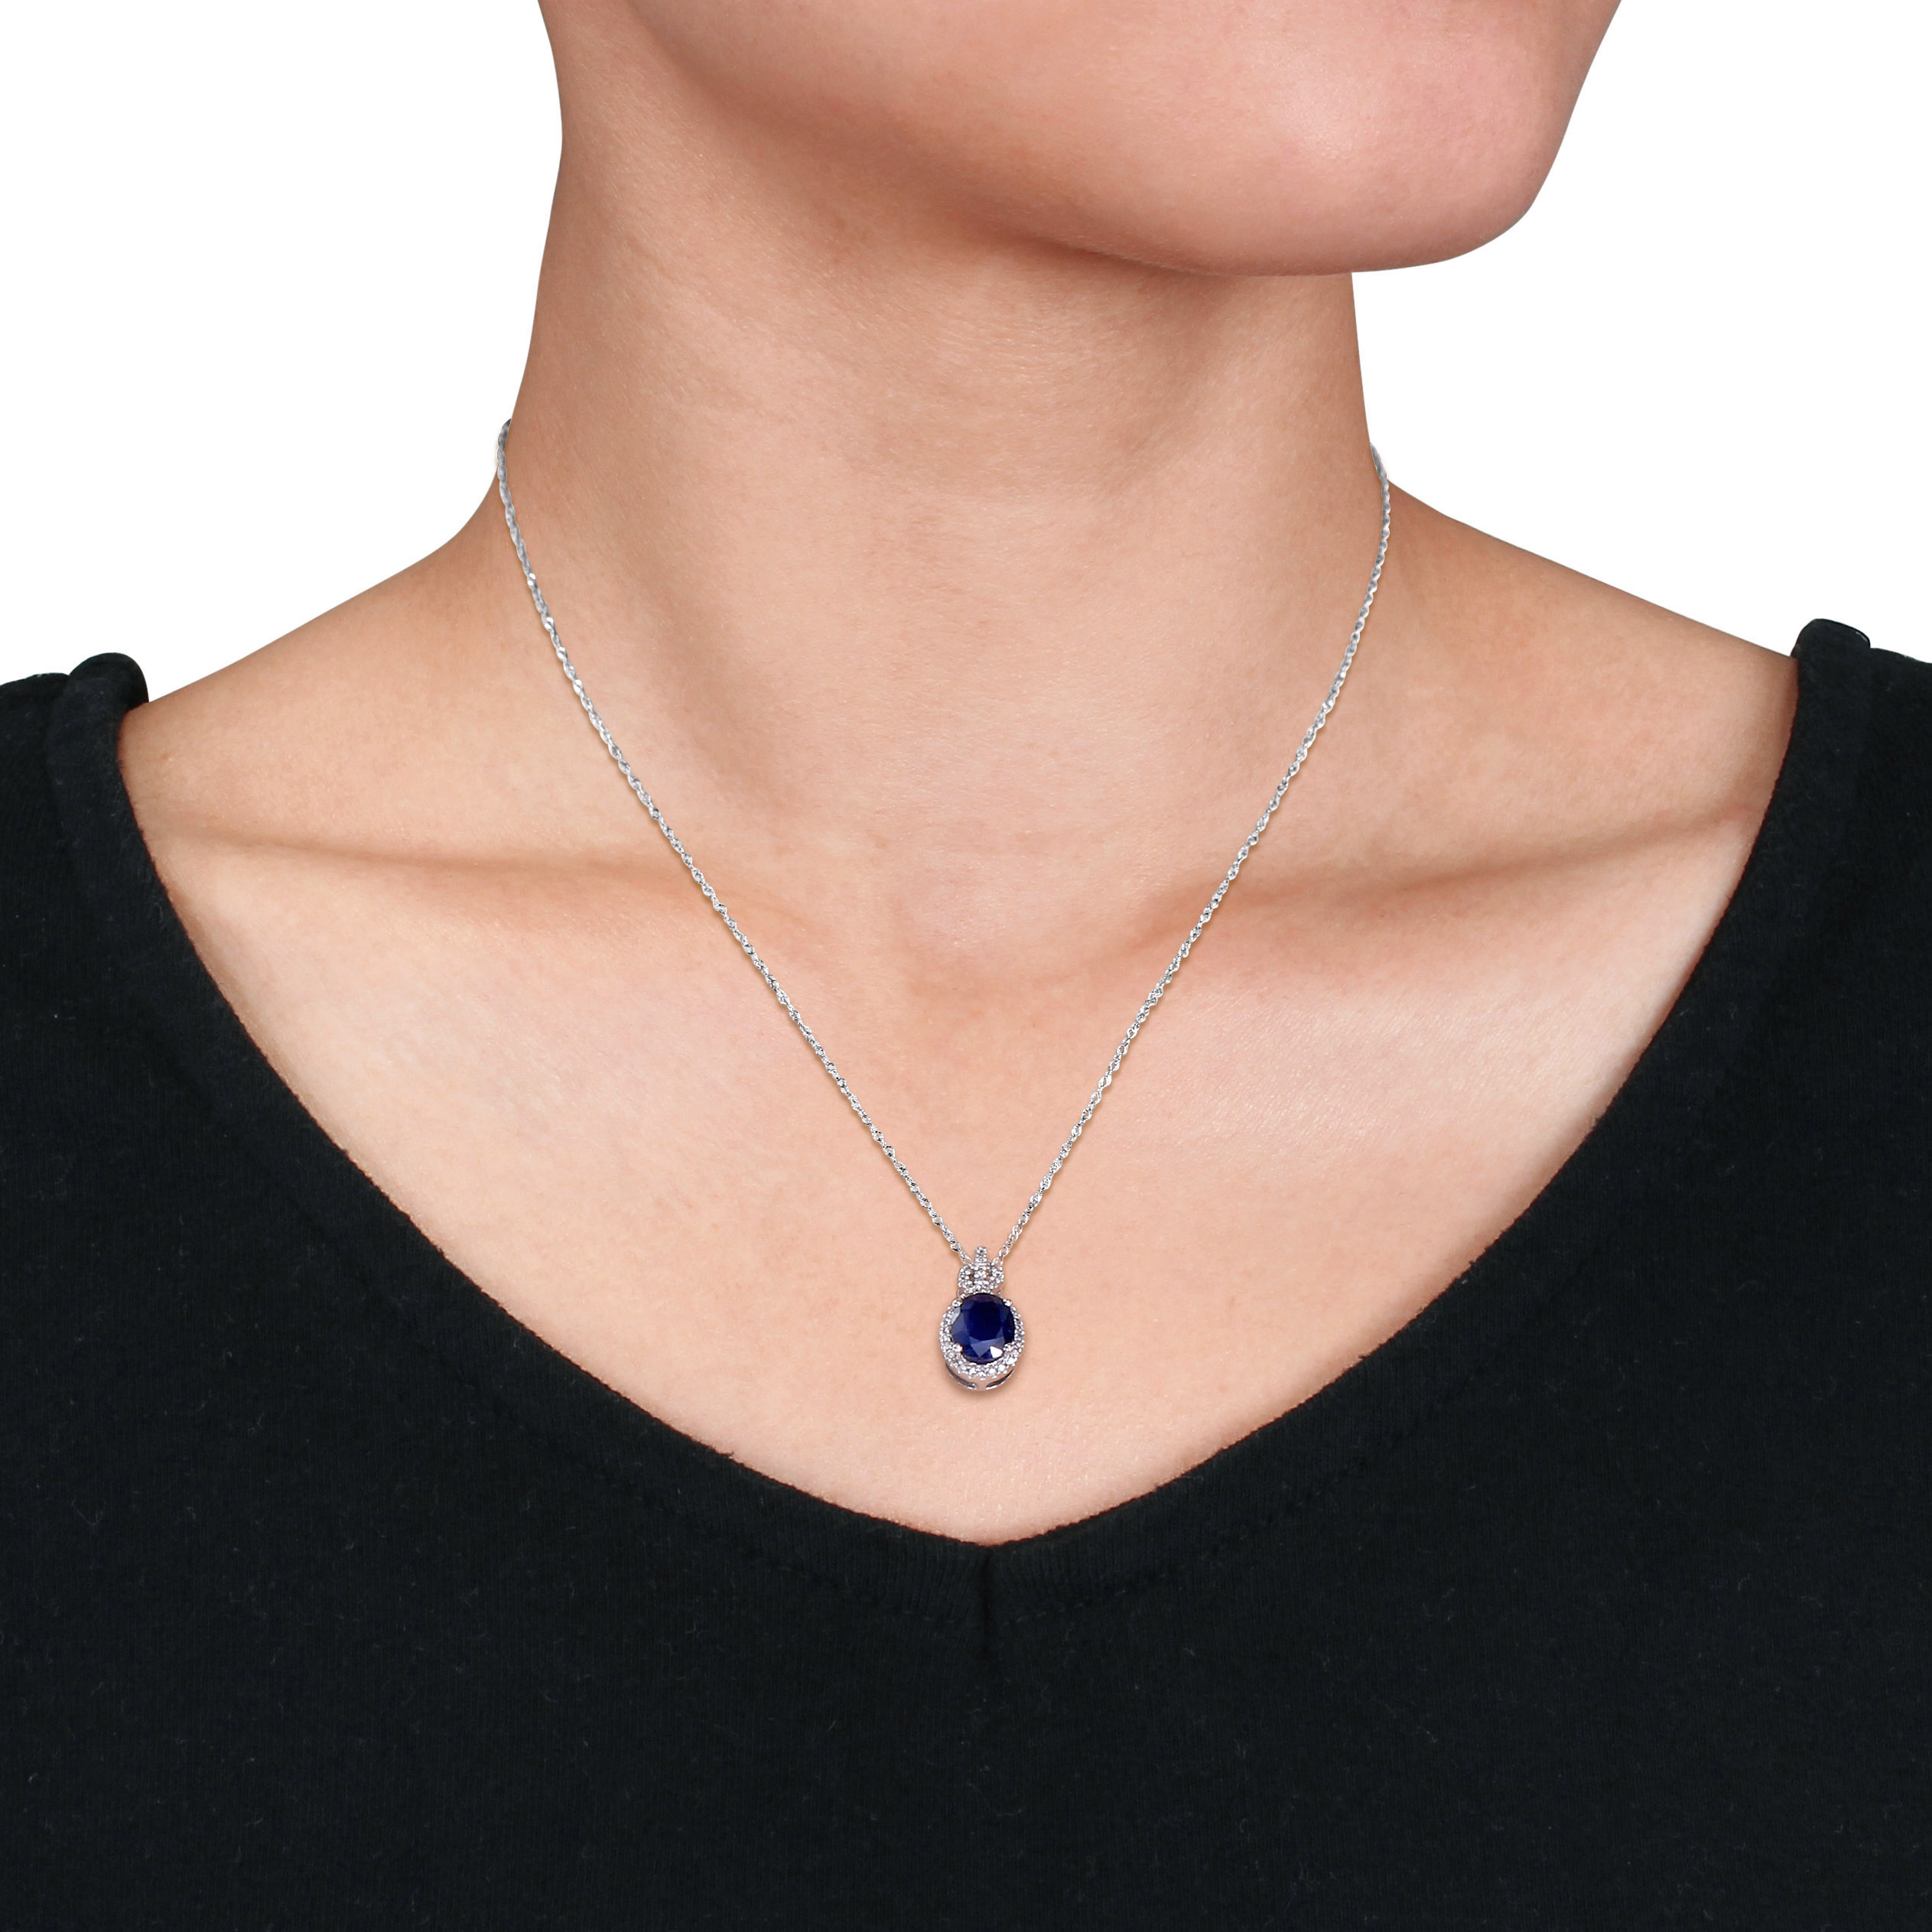 1/6 CT TW Diamond and 2 5/8 CT TGW Diffused Sapphire Pendant with Chain in 10k White Gold - 17 in.